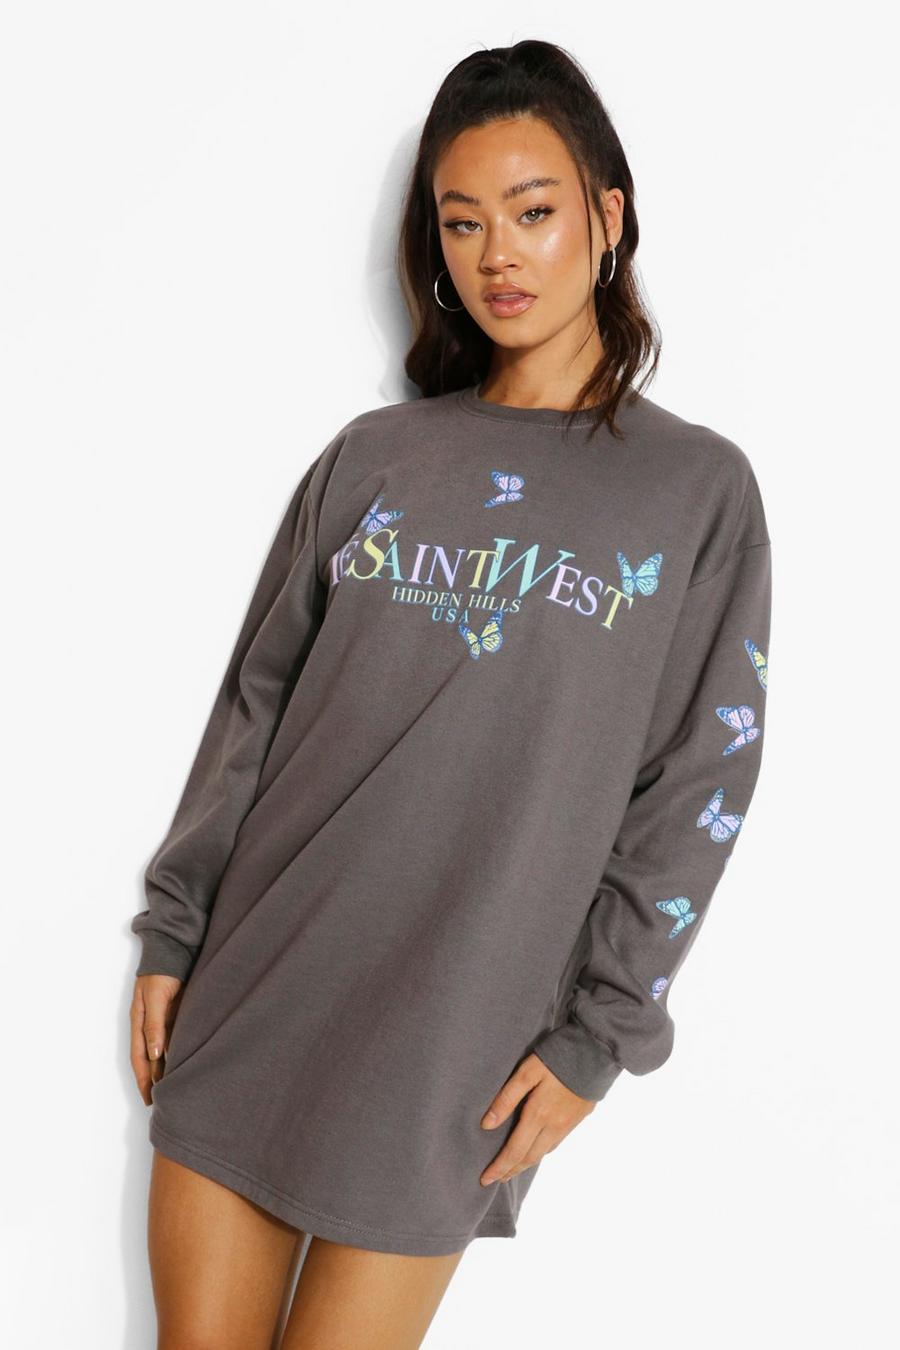 Charcoal grey Ye Saint West Butterfly Print Sweater Dress image number 1